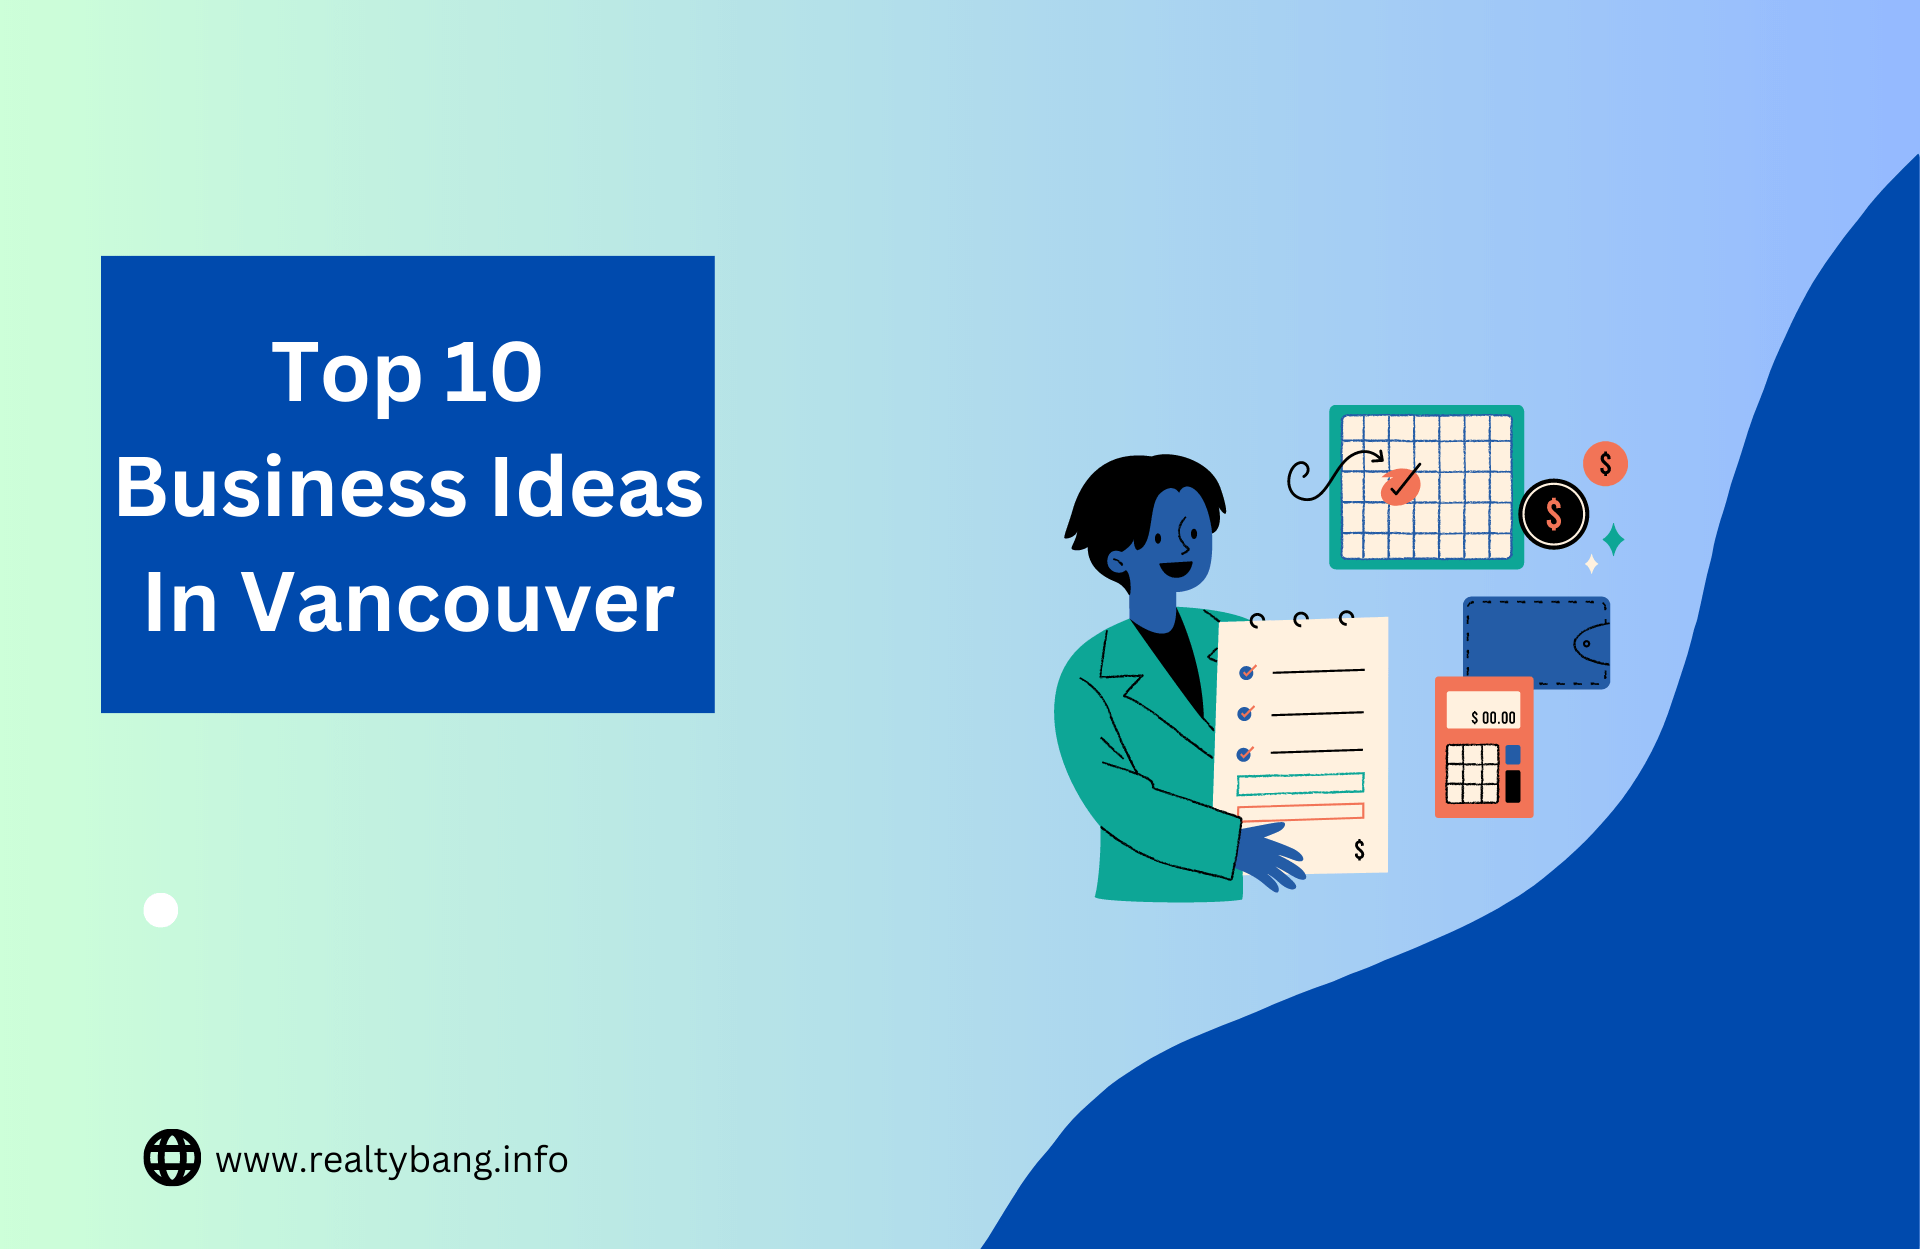 TOP 10 BUSINESS IDEAS IN VANCOUVER